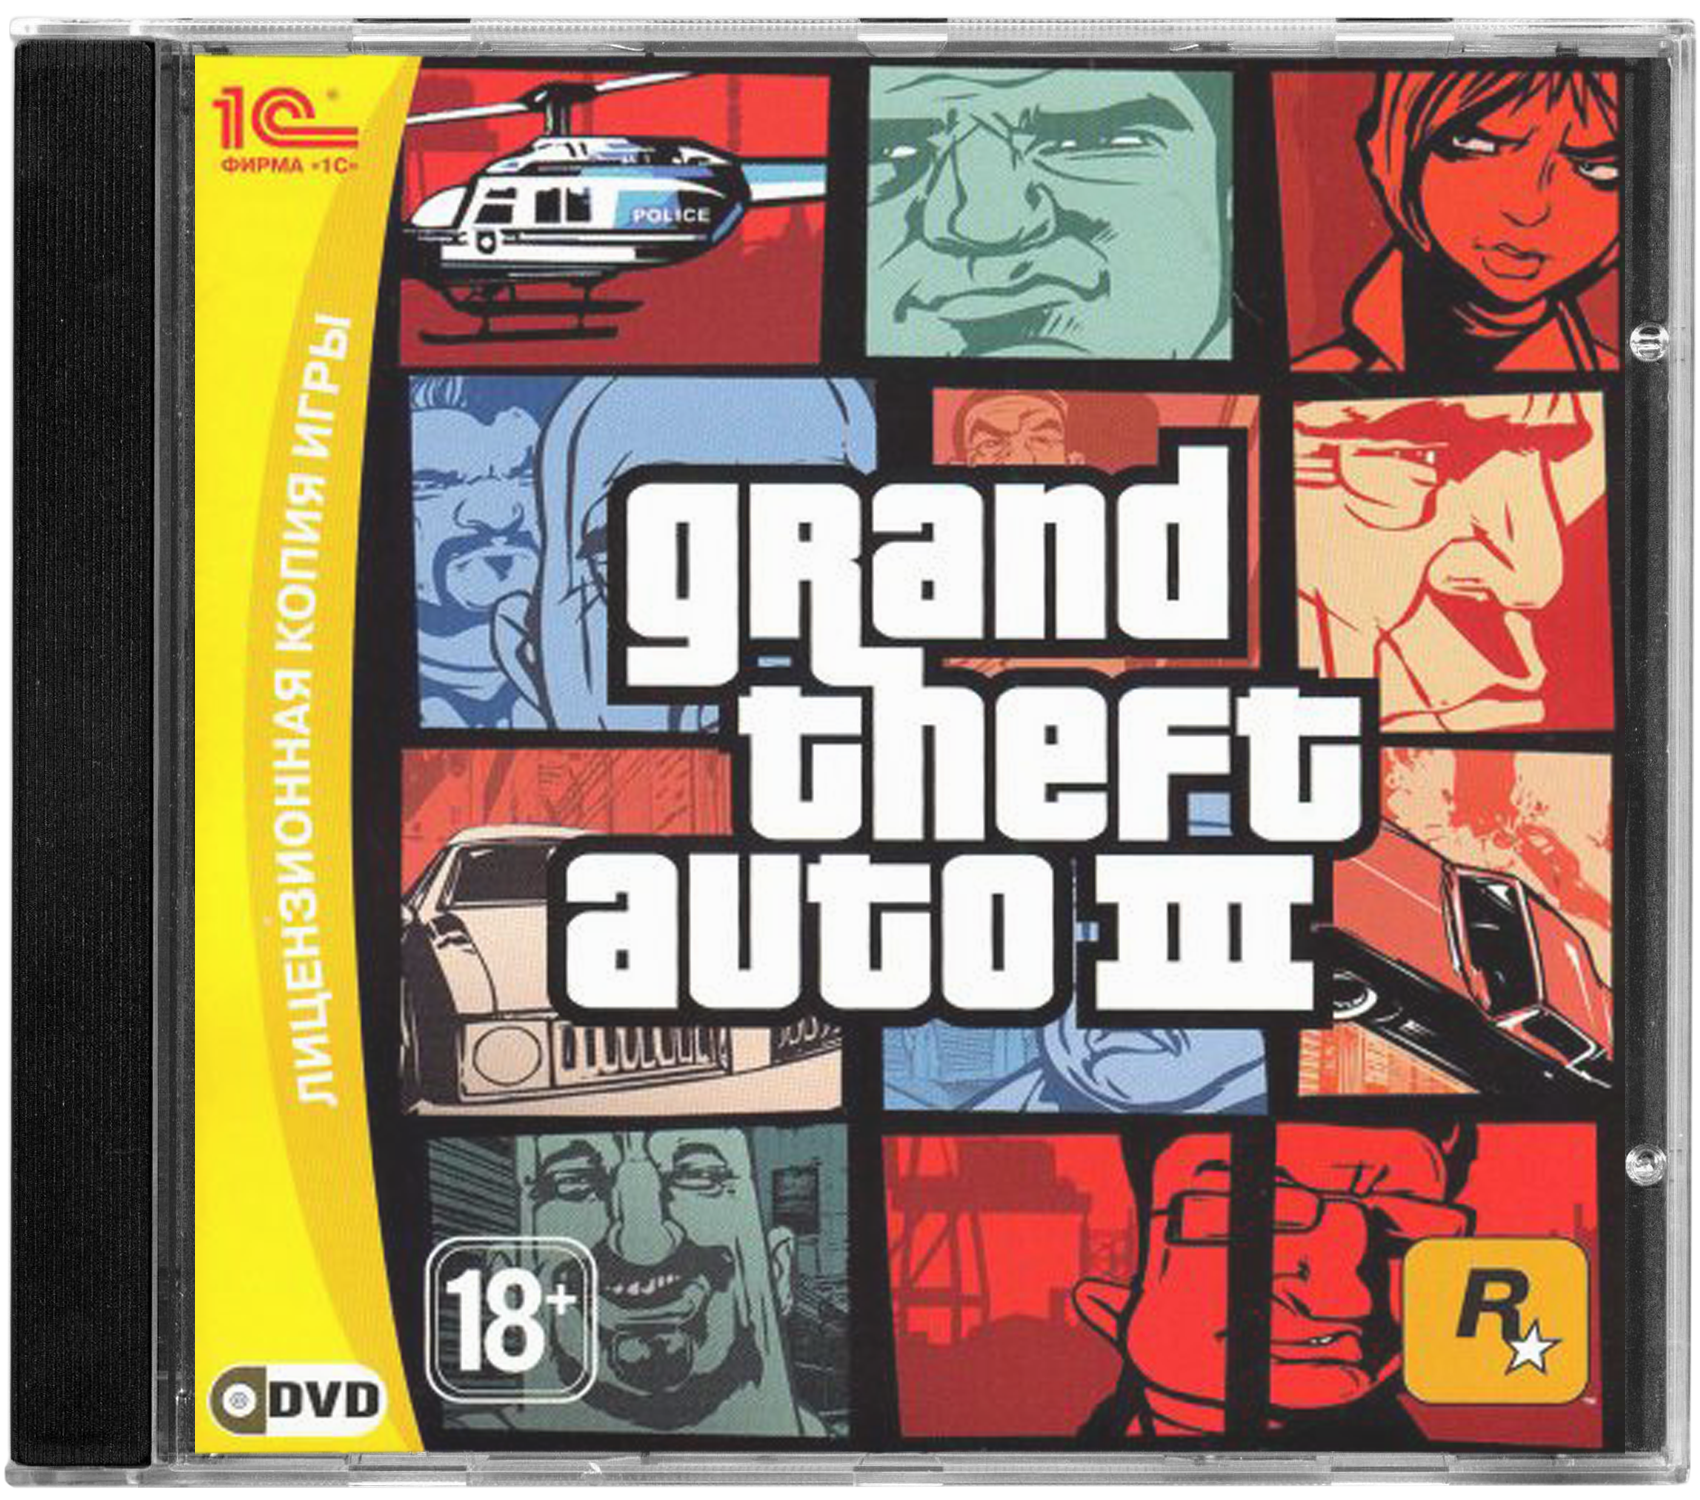 Gta collection. GTA 3 ps2 диск. Grand Theft auto III ps2 2000. DVD диск 1с: "Grand Theft auto: 3. Grand Theft auto III ps2.